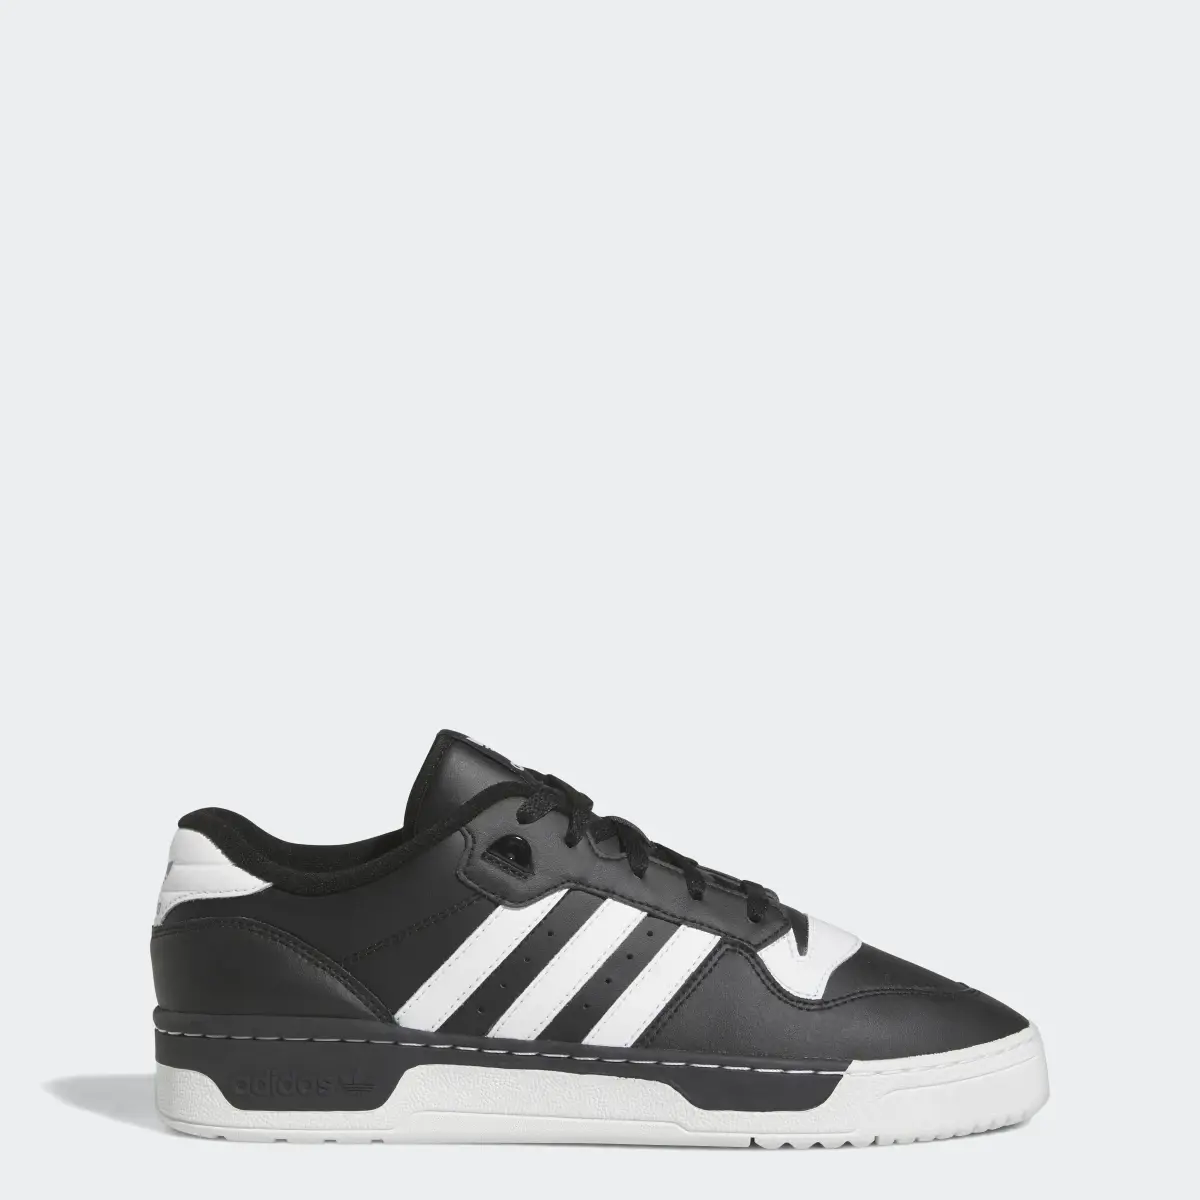 Adidas Rivalry Low Shoes. 1